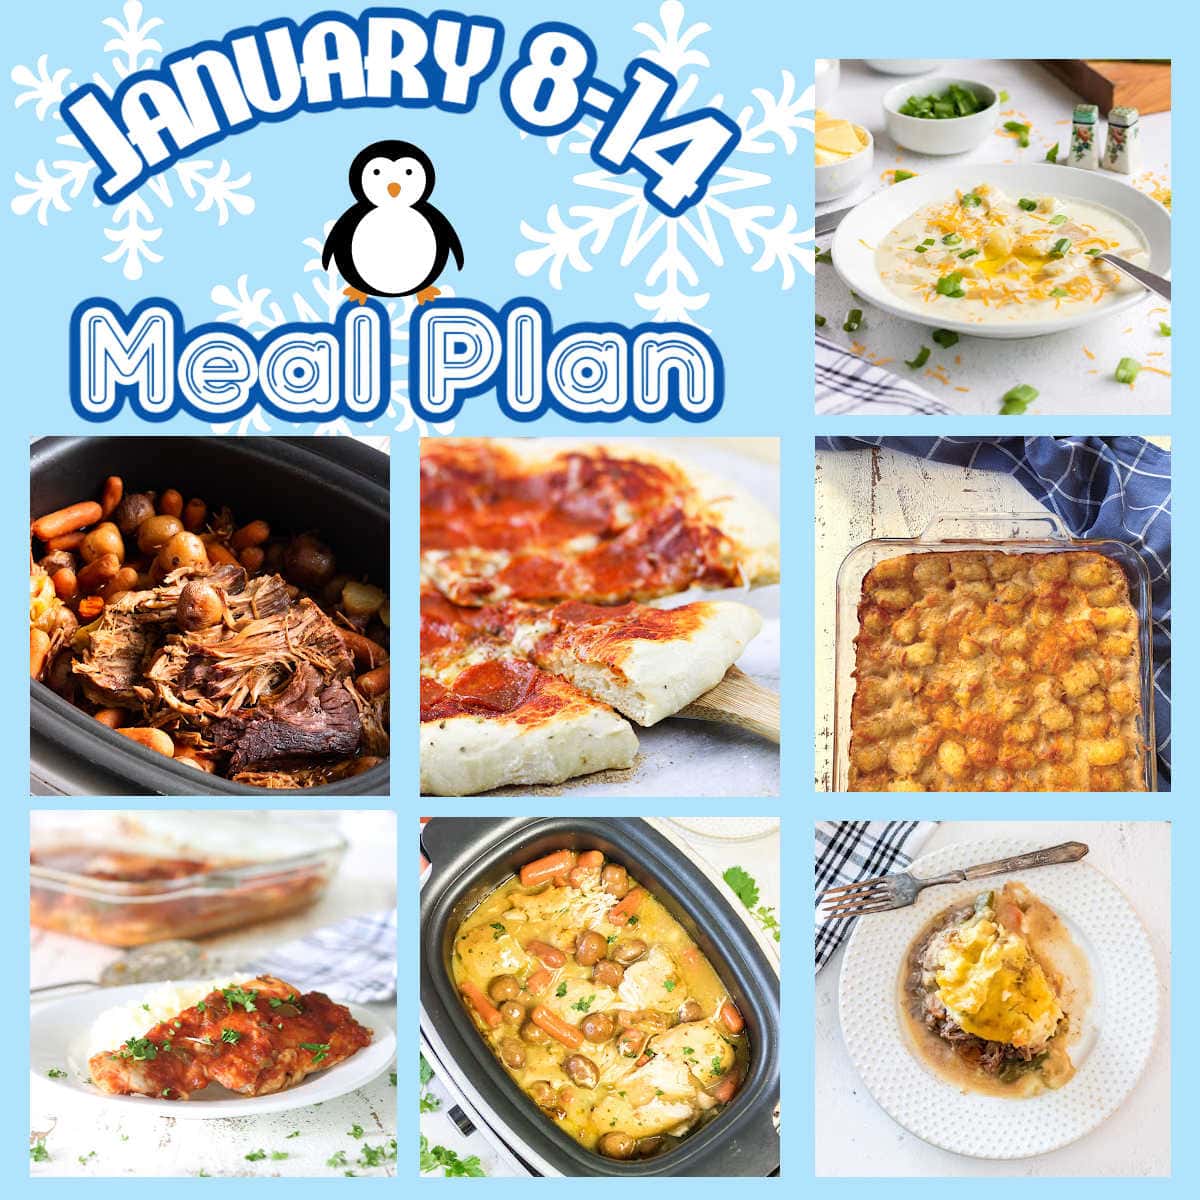 Collage of images for January 8-14 meal plan.